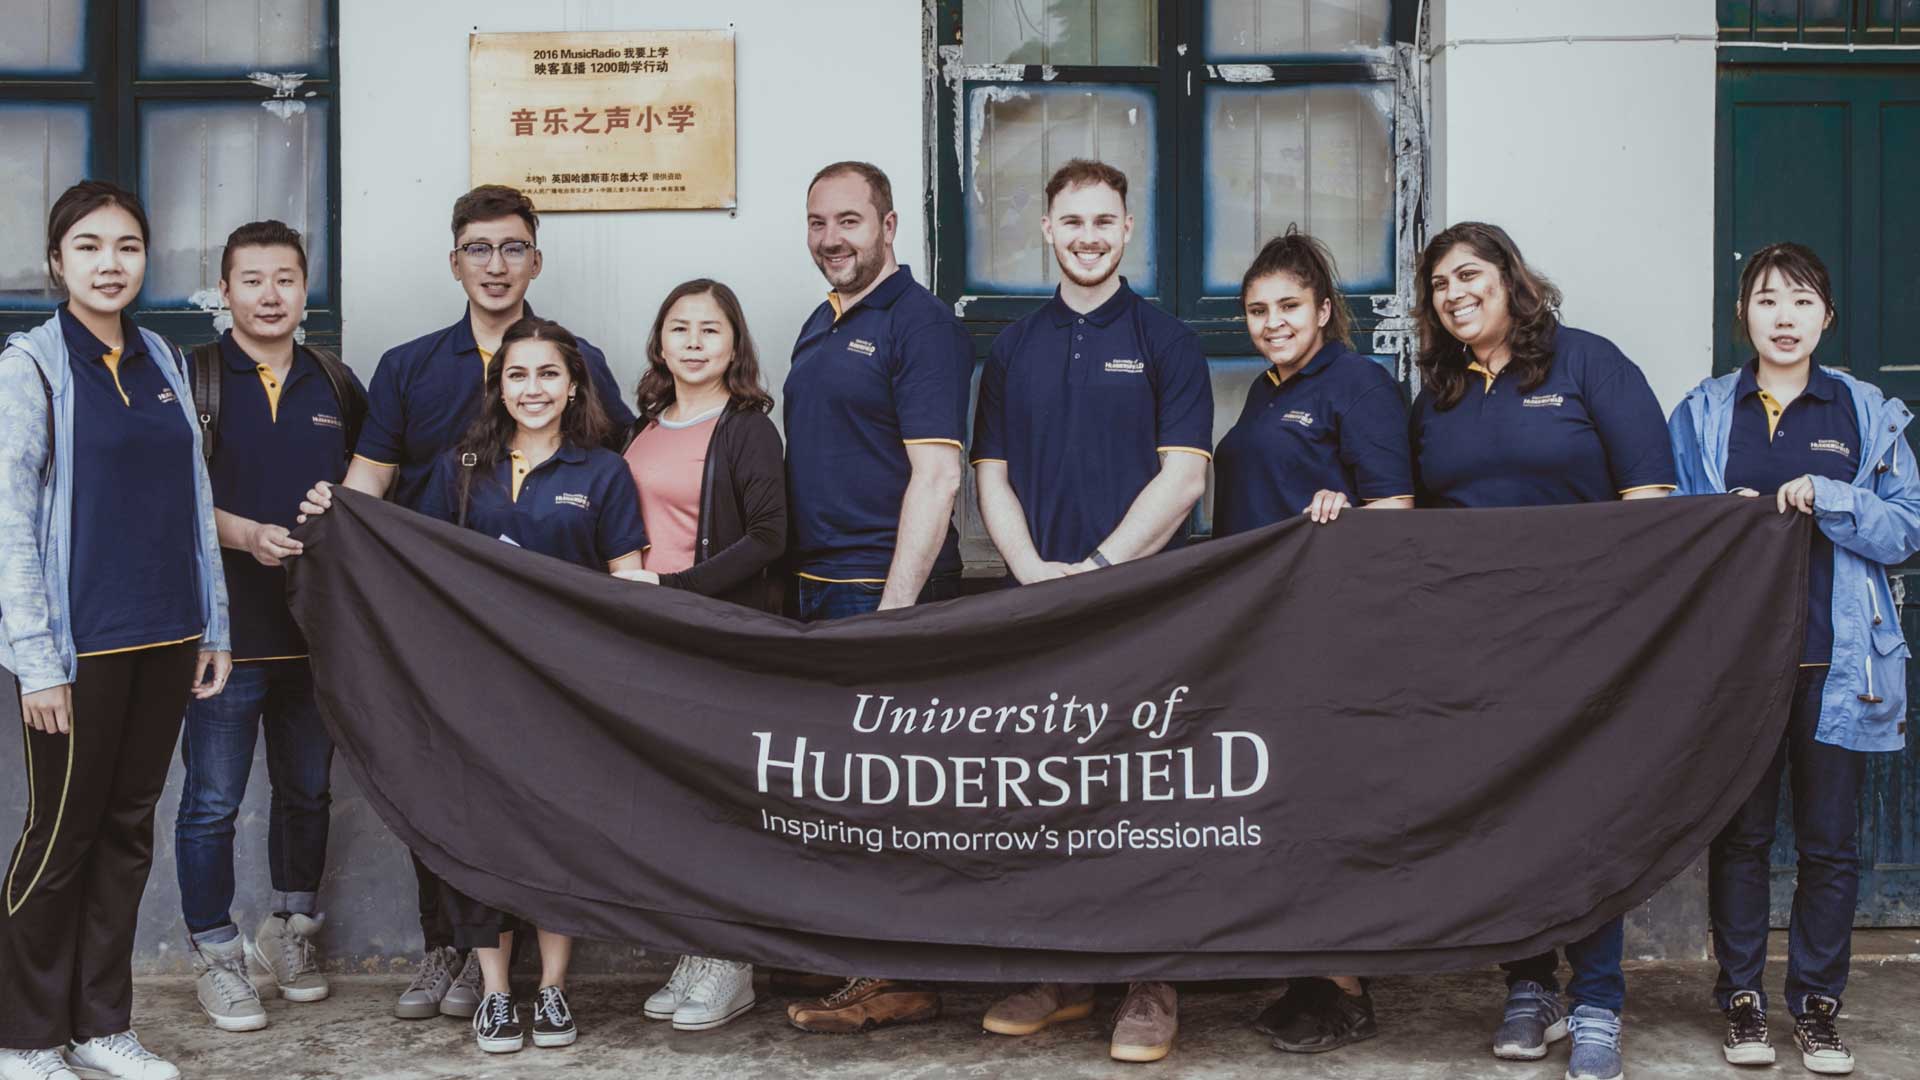 Students to go China on the Santander Universities mobility programme